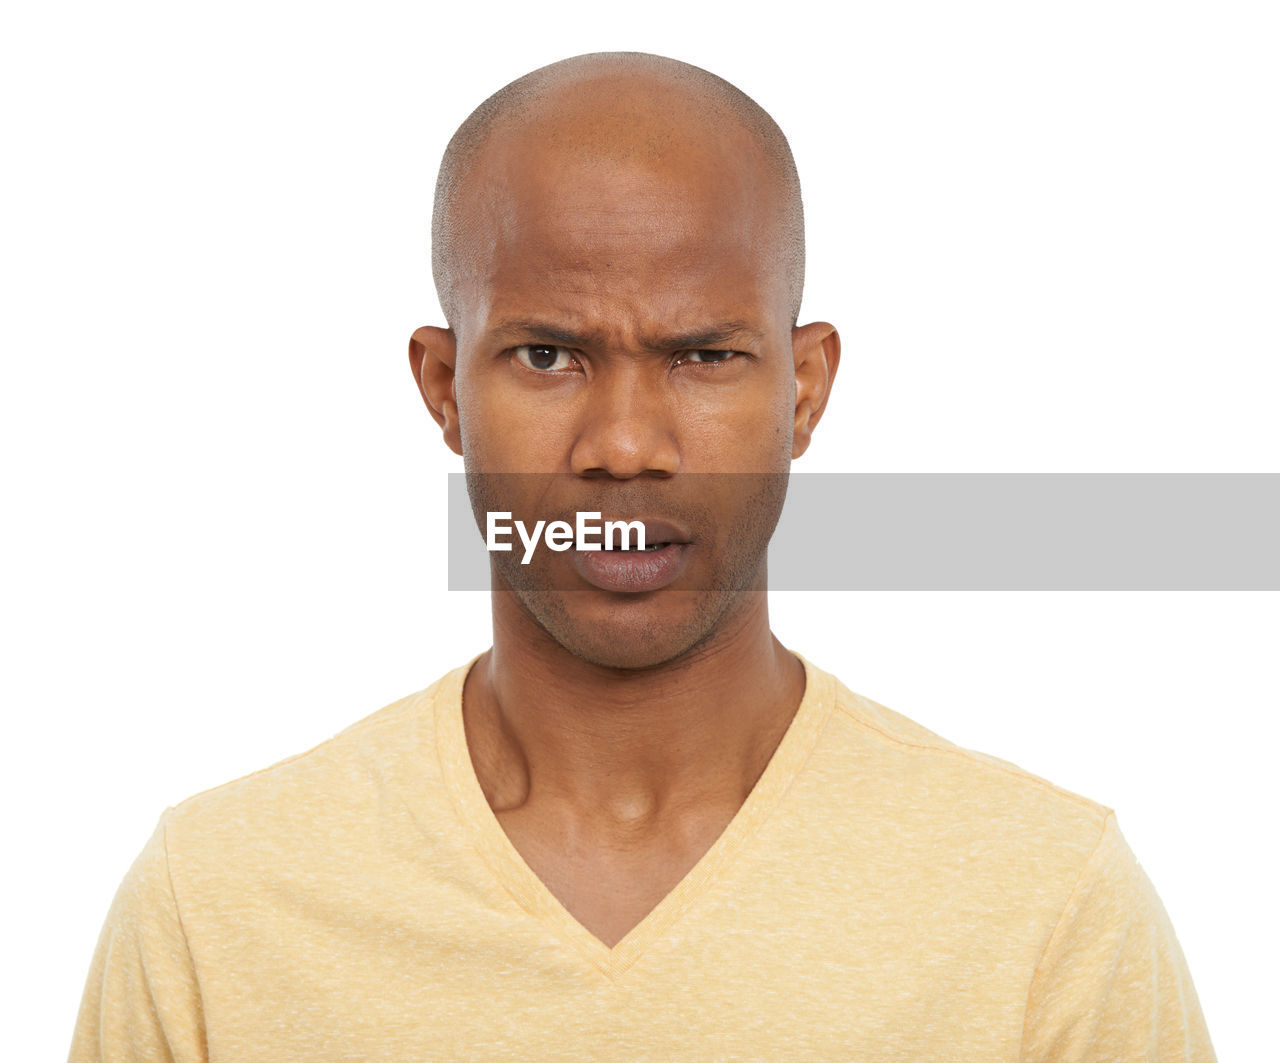 portrait, shaved head, one person, studio shot, white background, headshot, adult, men, looking at camera, indoors, casual clothing, cut out, front view, person, emotion, completely bald, human face, serious, young adult, copy space, human hair, human head, relaxation, chin, finger, facial expression, looking, negative emotion, clothing, balding, t-shirt